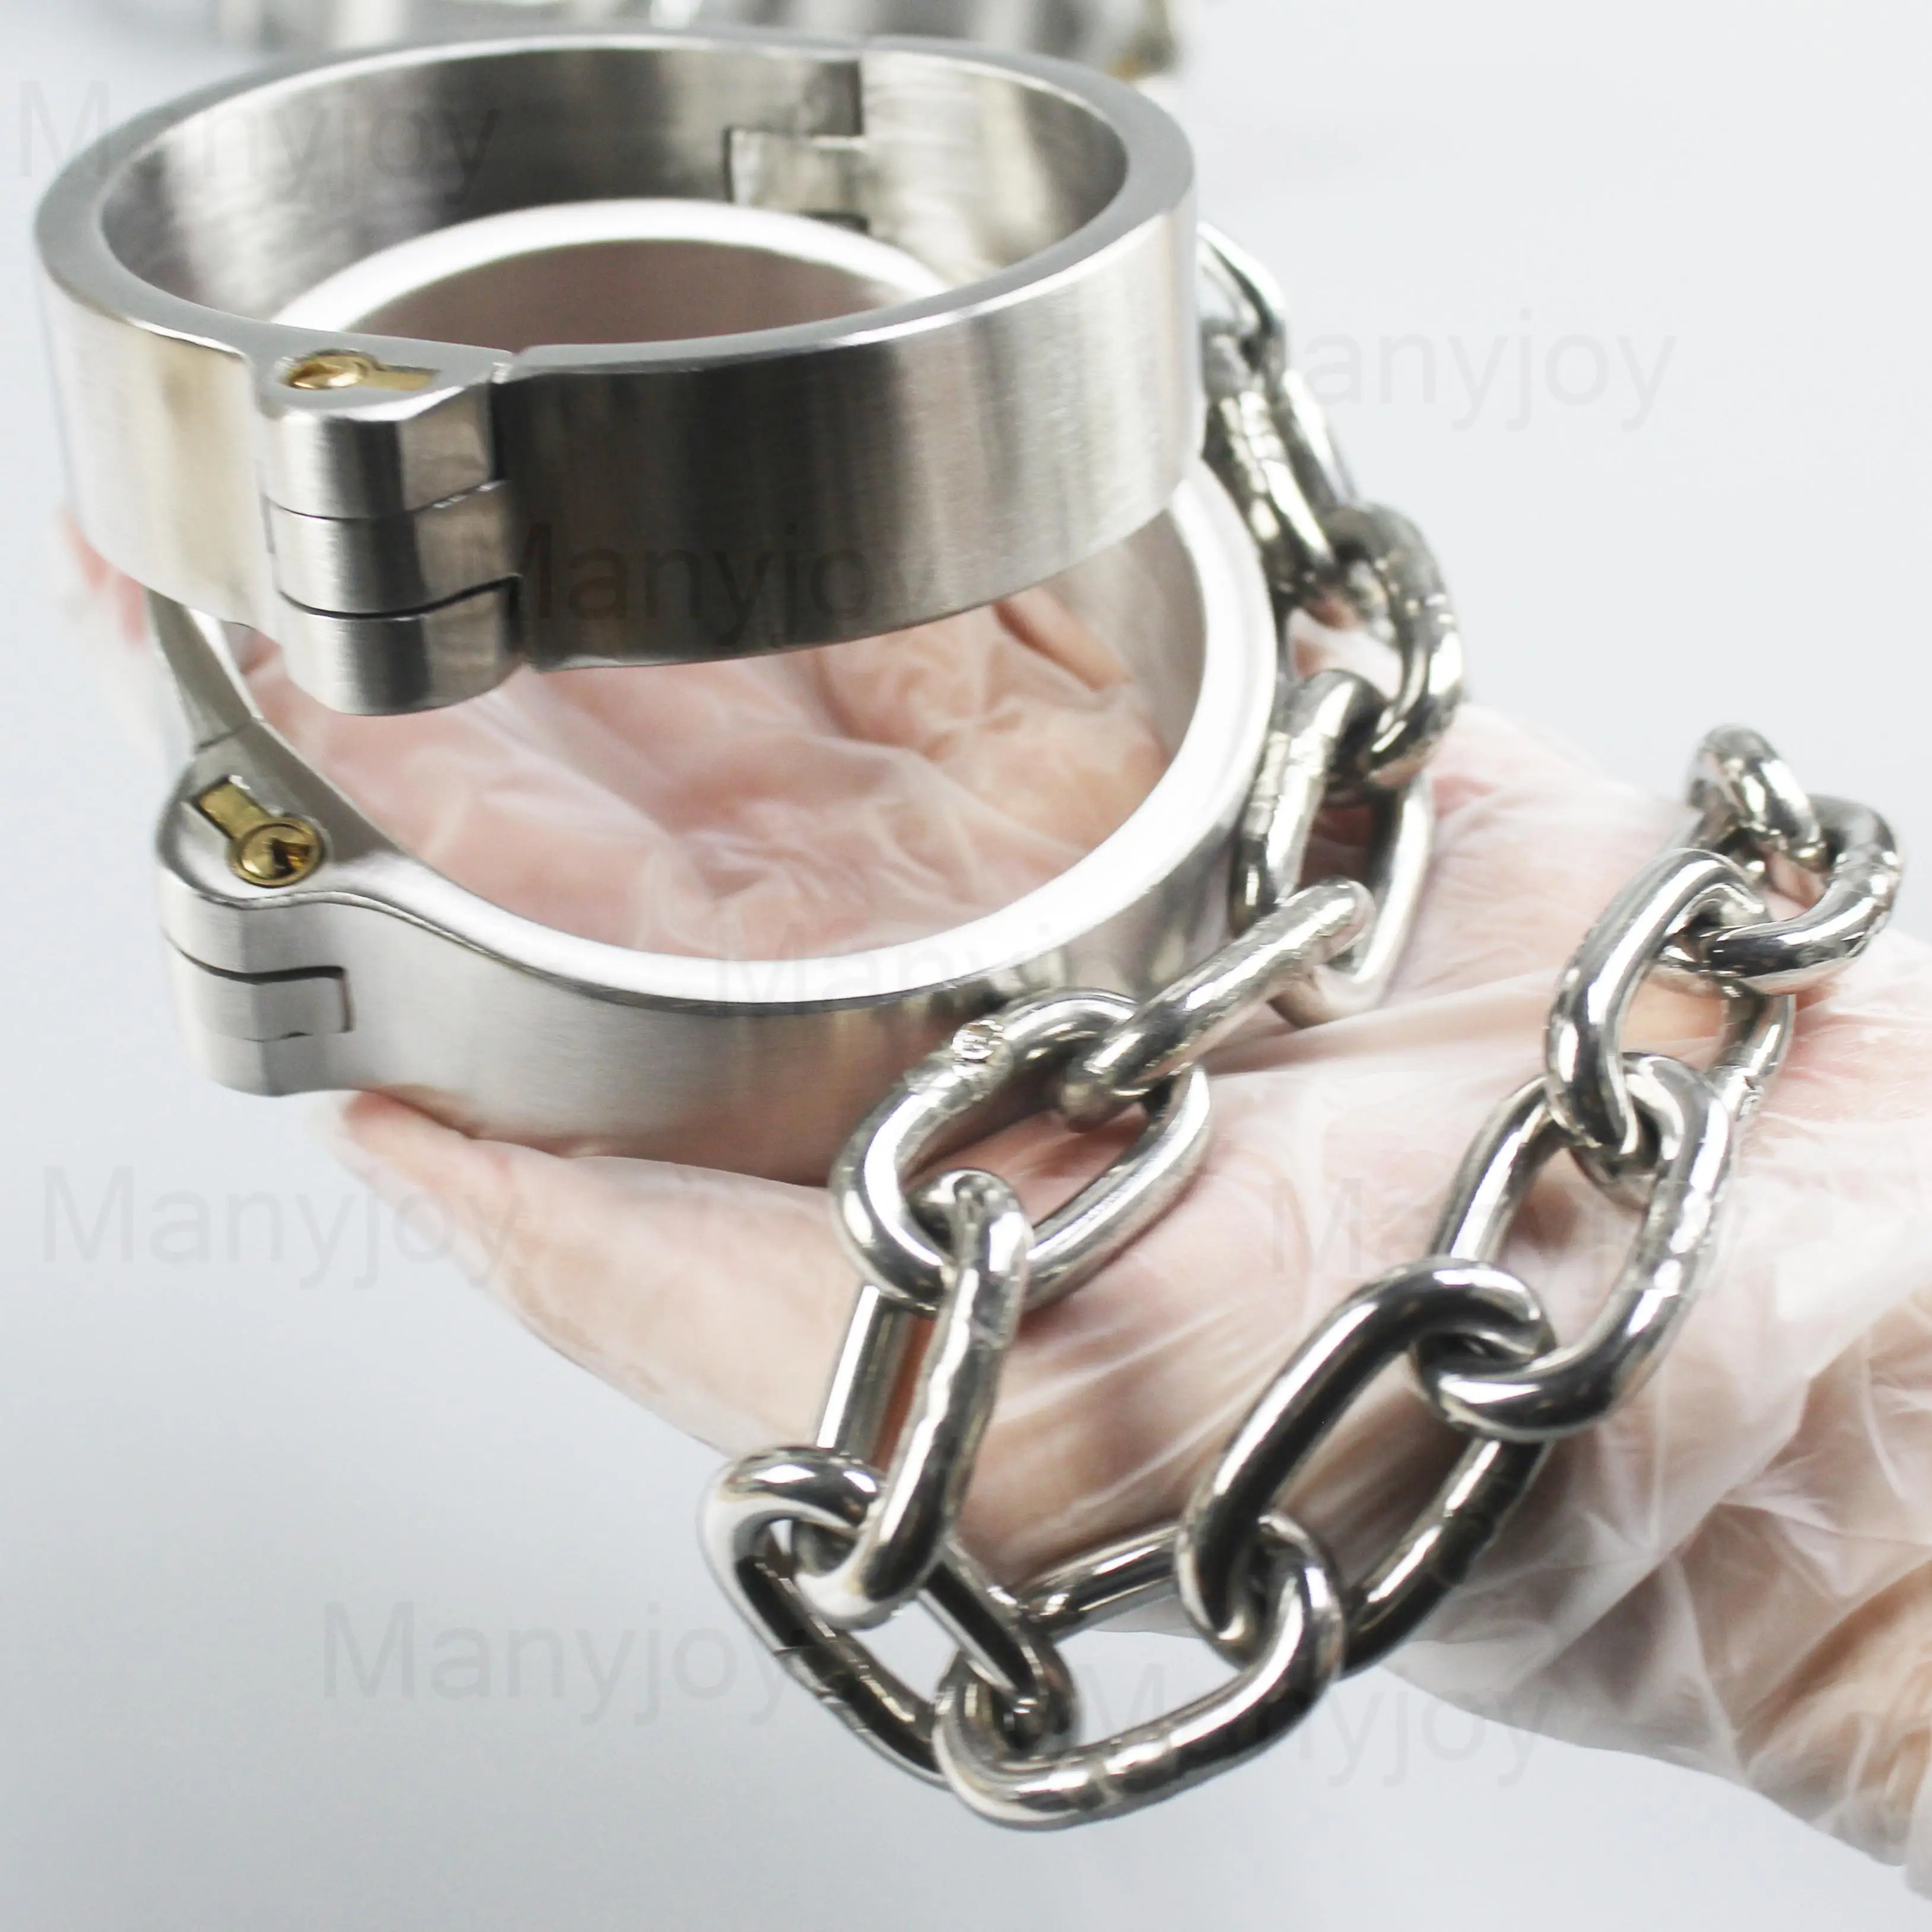 

Stainless Steel Insert Lock Neck Collar Handcuffs Ankle Cuffs with Detachable Chain Slave BDSM Bondage Set Sey Toys for Adult